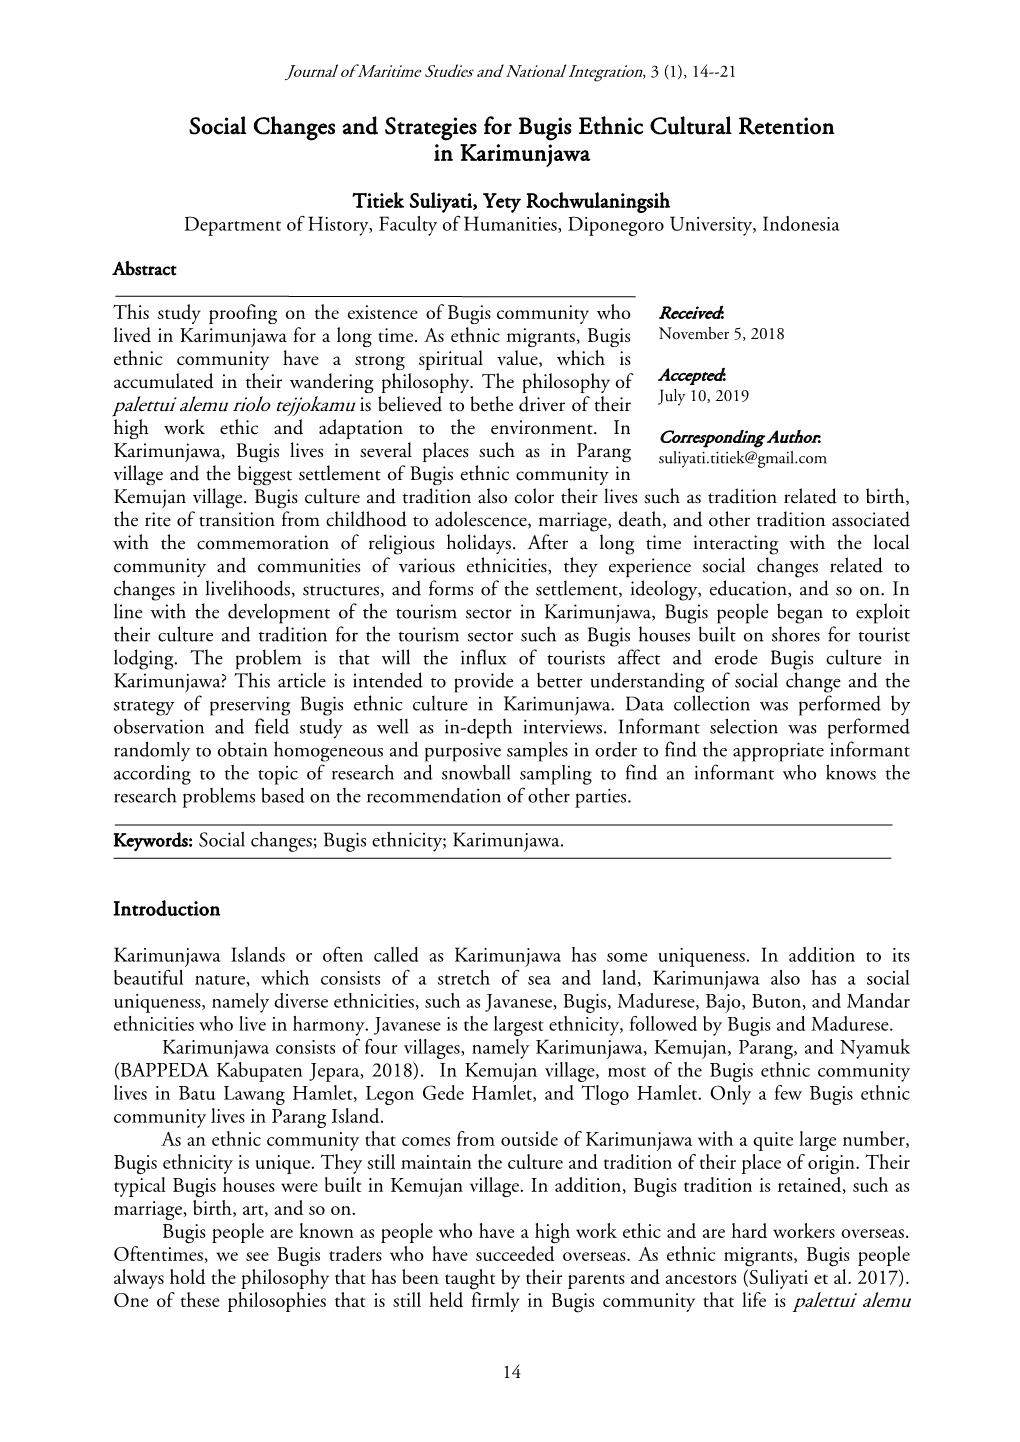 Social Changes and Strategies for Bugis Ethnic Cultural Retention in Karimunjawa